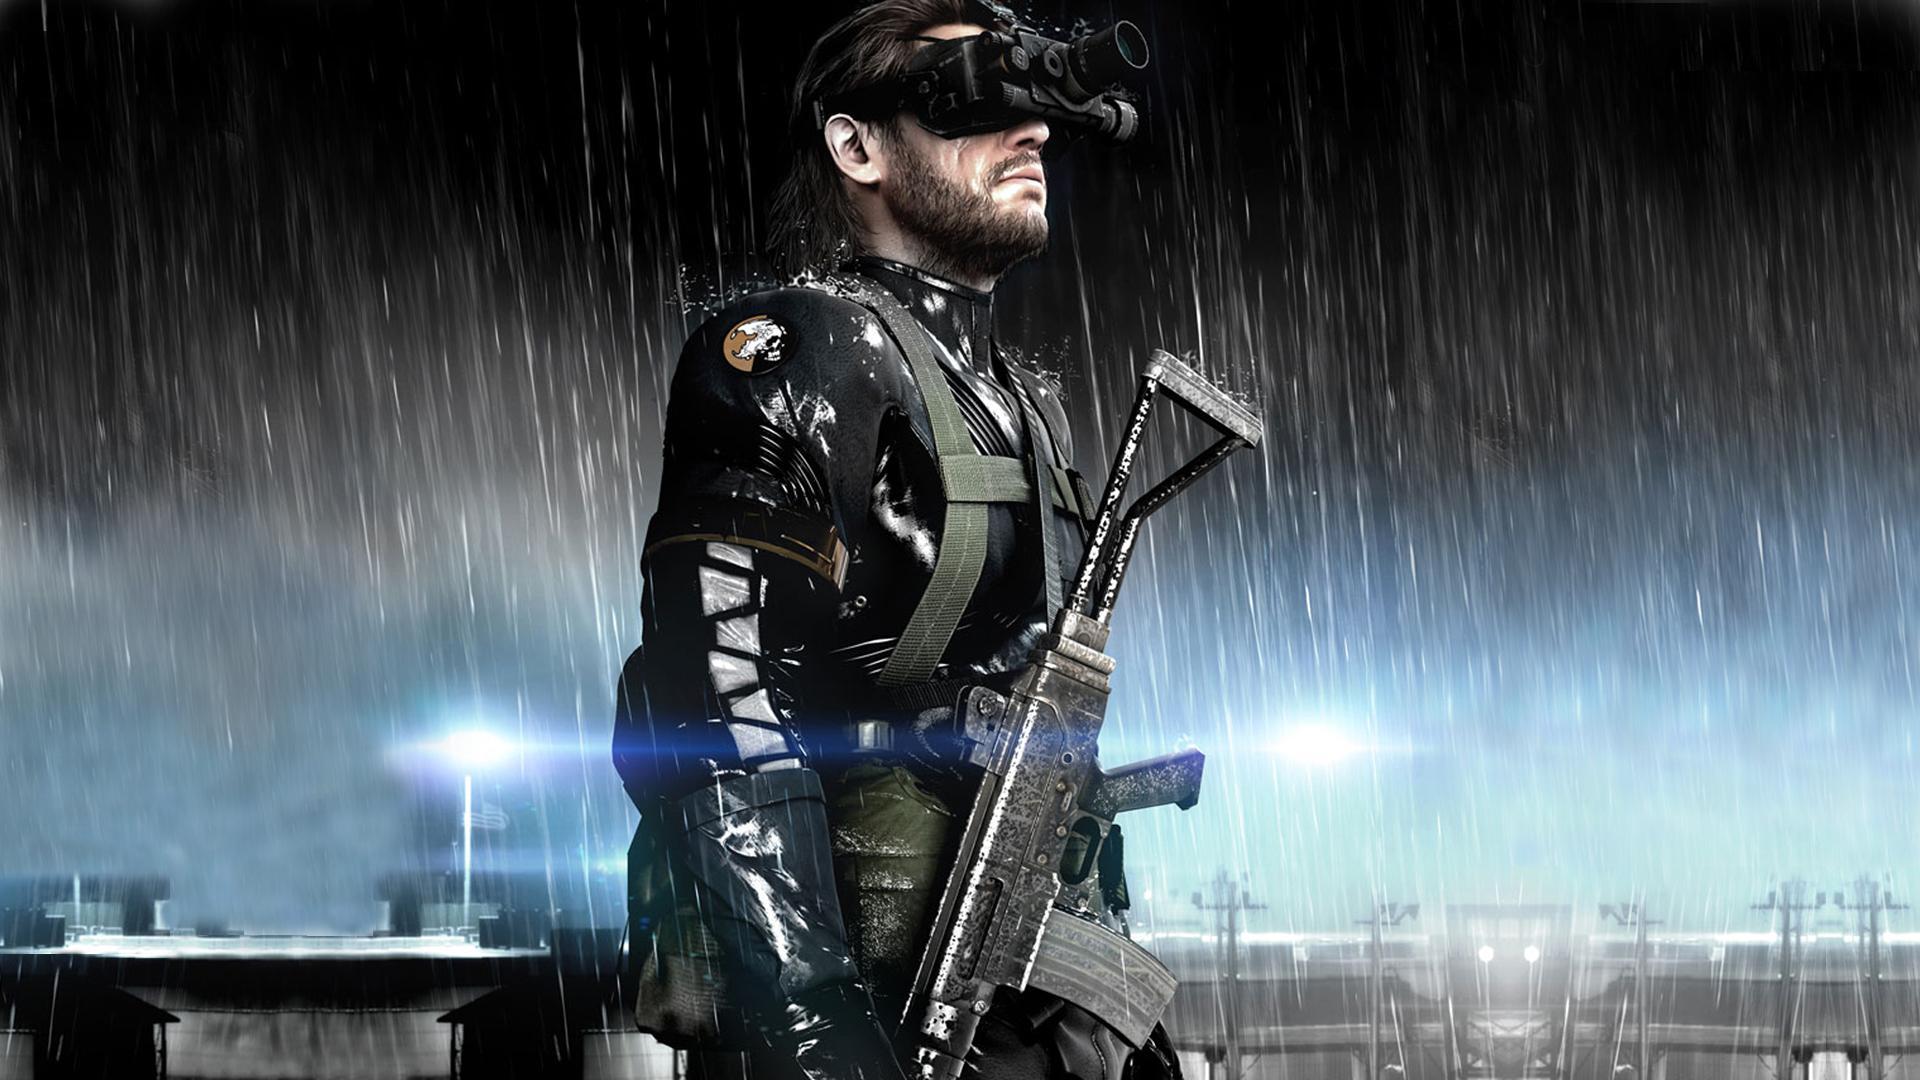 Solid snake wallpapers